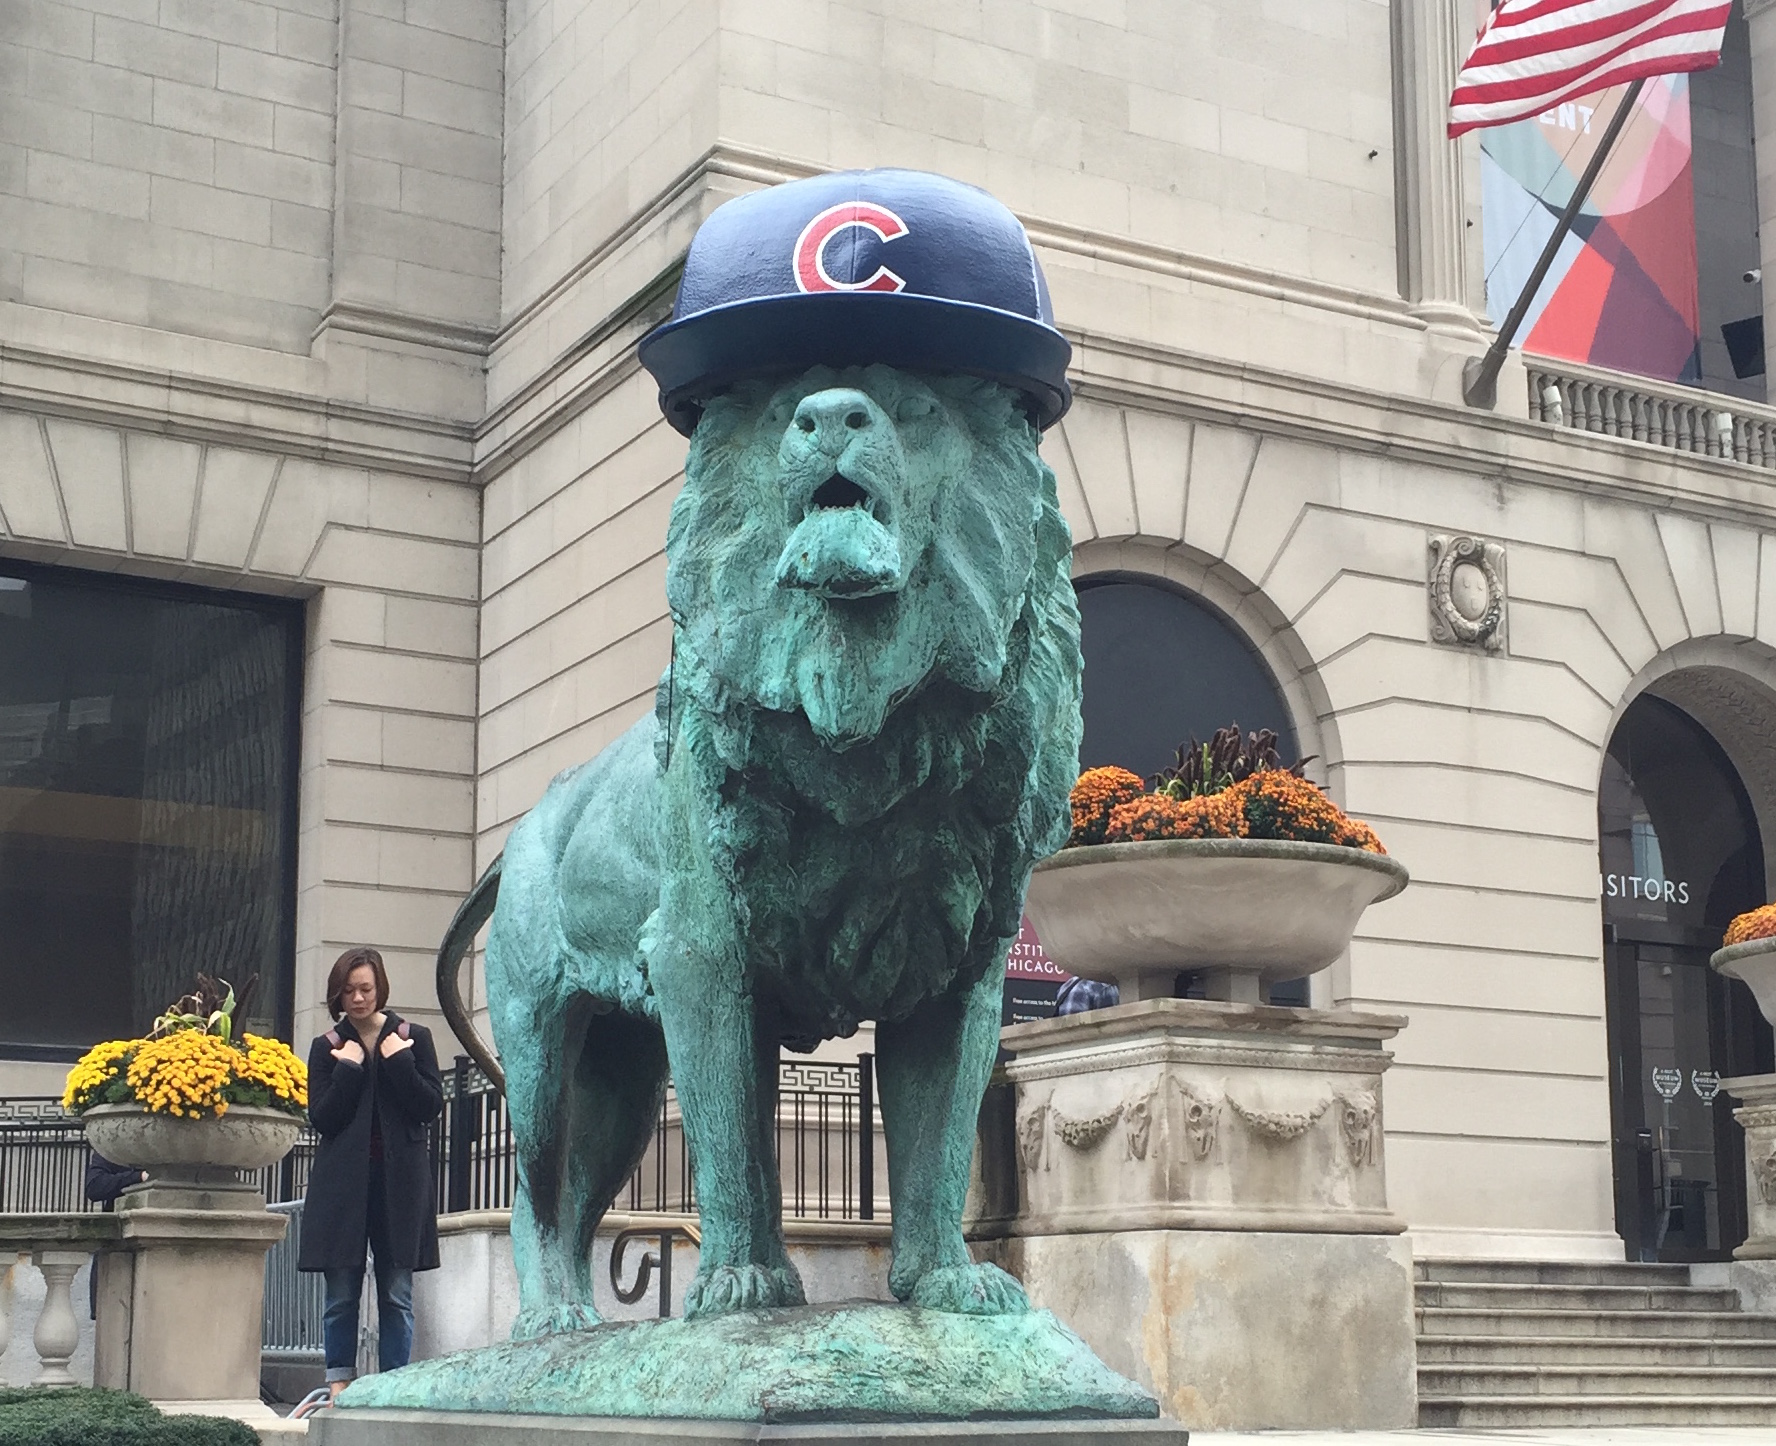 For the first time, the lions outside of the Art Institute of Chicago are adorned with Cubs hats, as the team competes in the 2016 World Series.